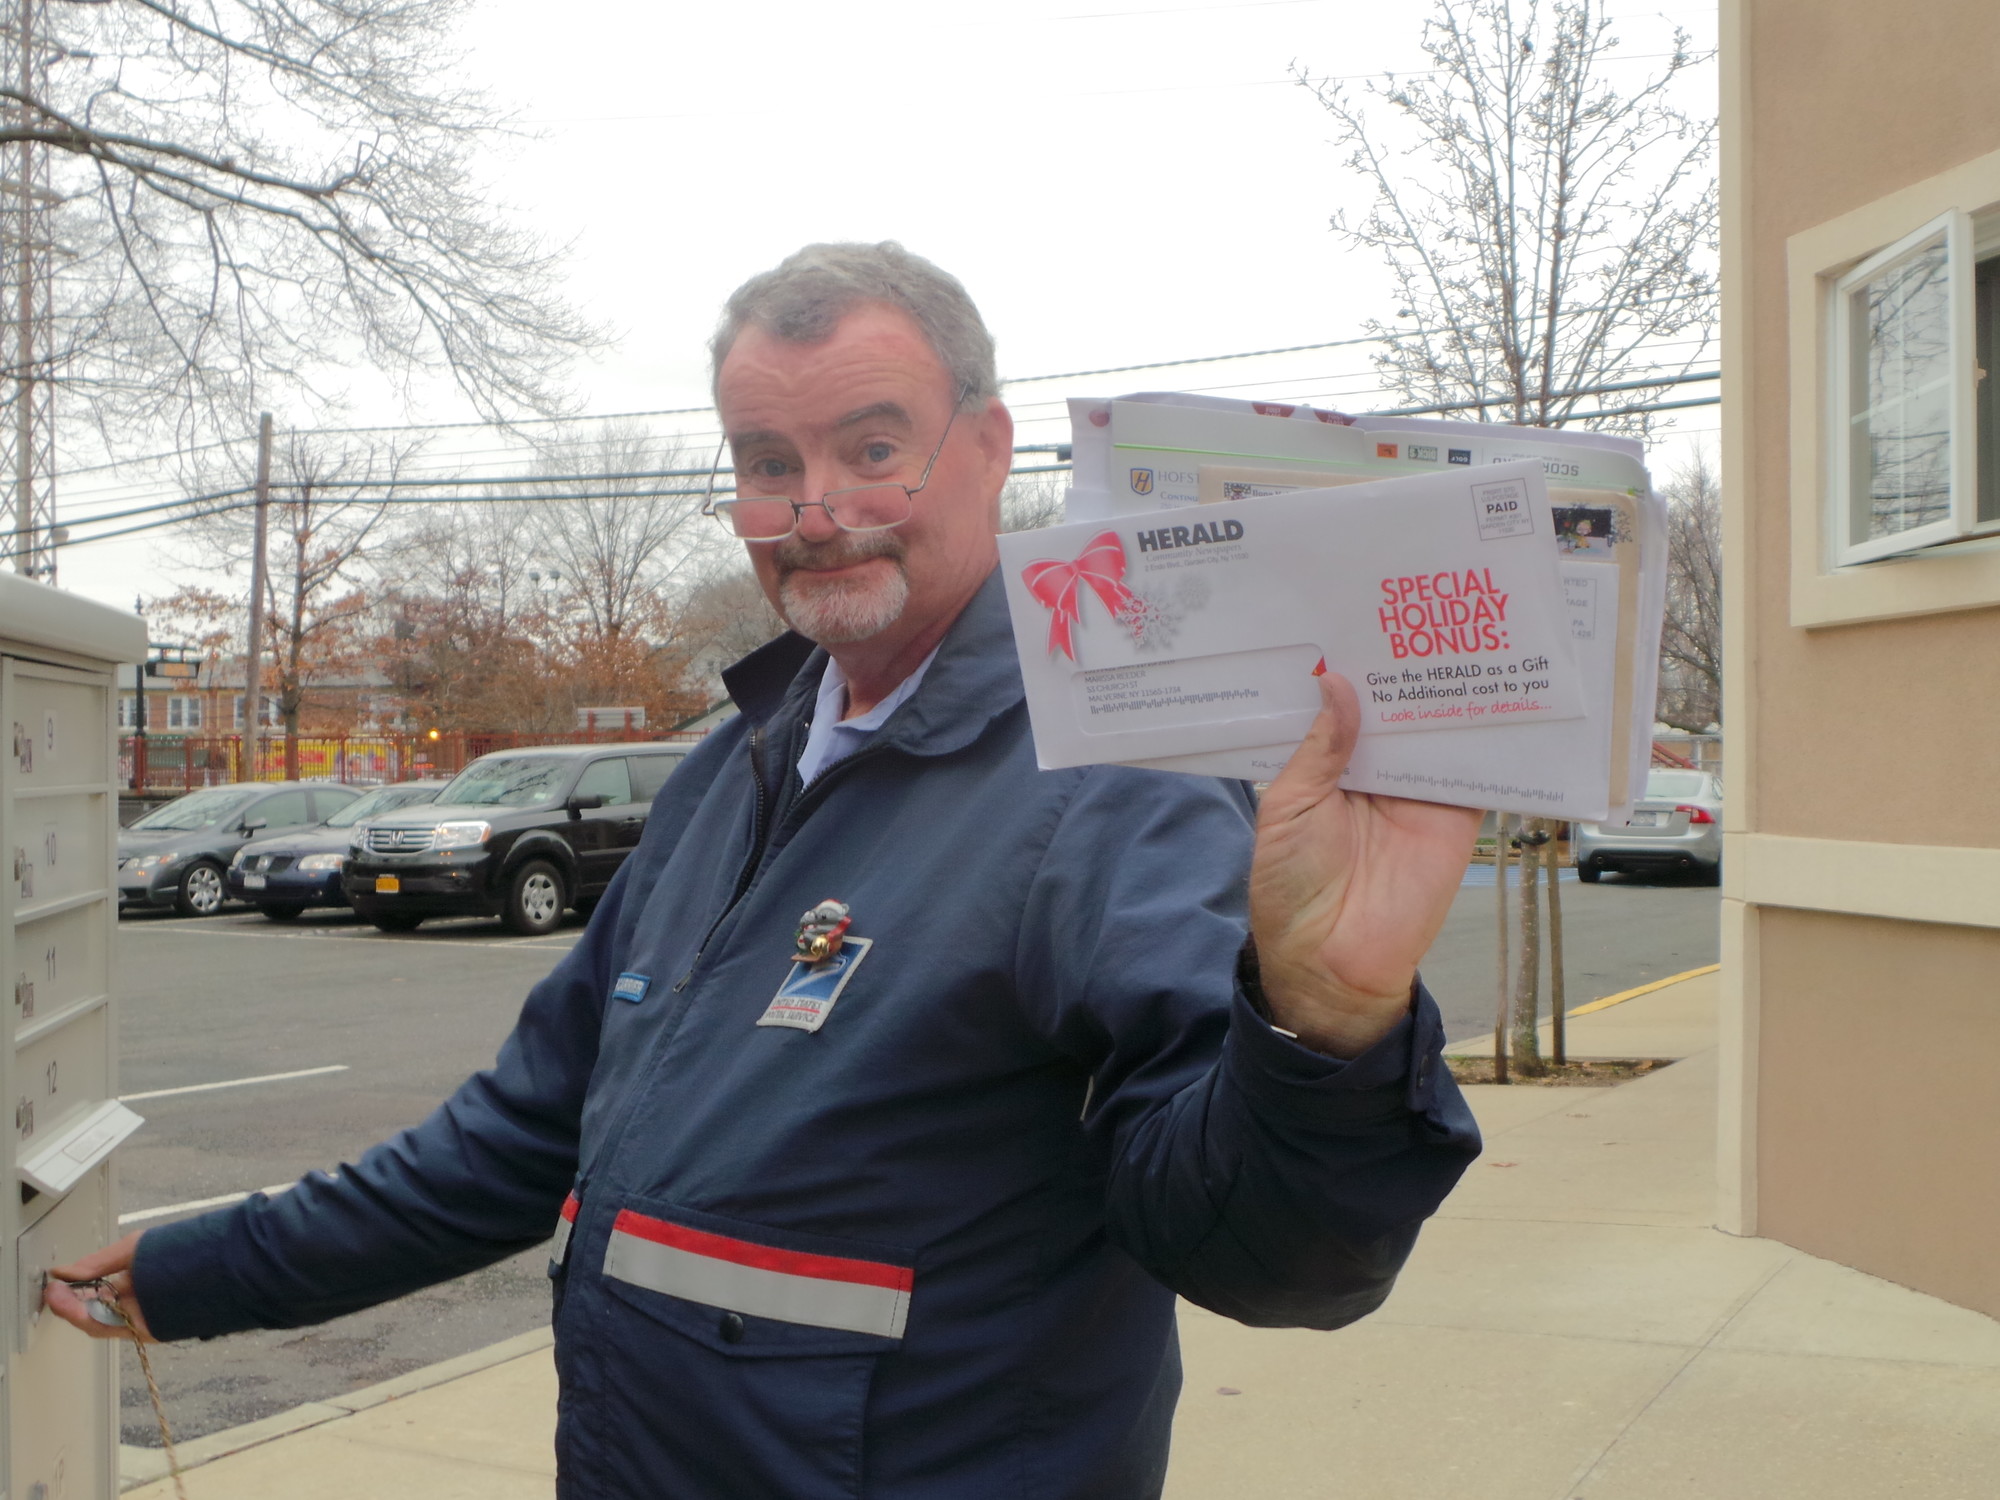 Read all about veteran Malverne postman, Walter Malloy, in this week's Herald.